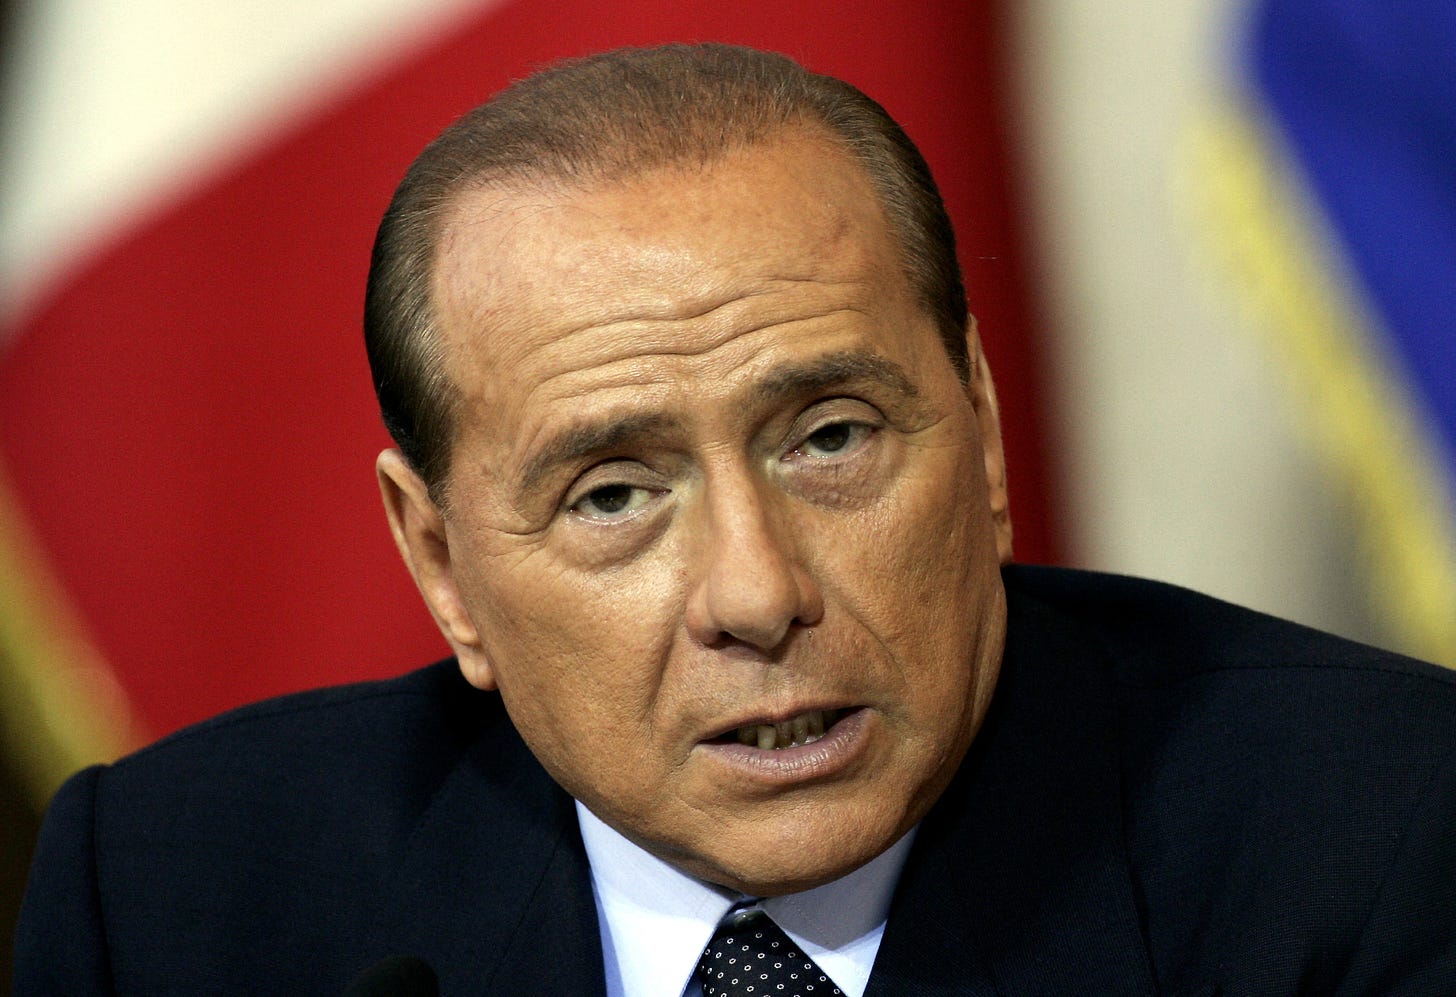 Italian Prime Minister Silvio Berlusconi answers a journalist's questions during a news conference in Rome